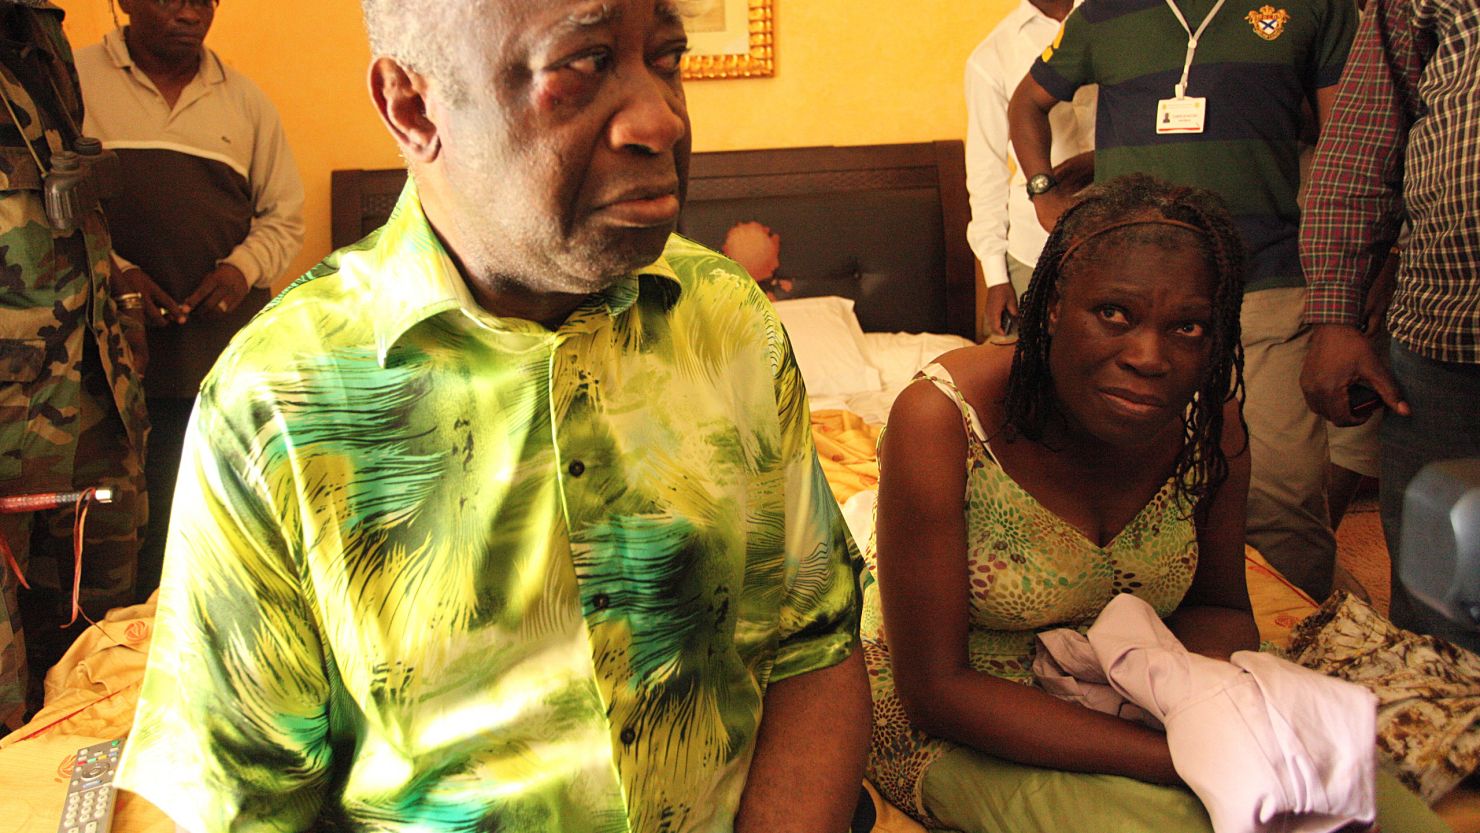 Ivory Coast strongman Laurent Gbagbo and his wife Simone were arrested on April 11, 2011.